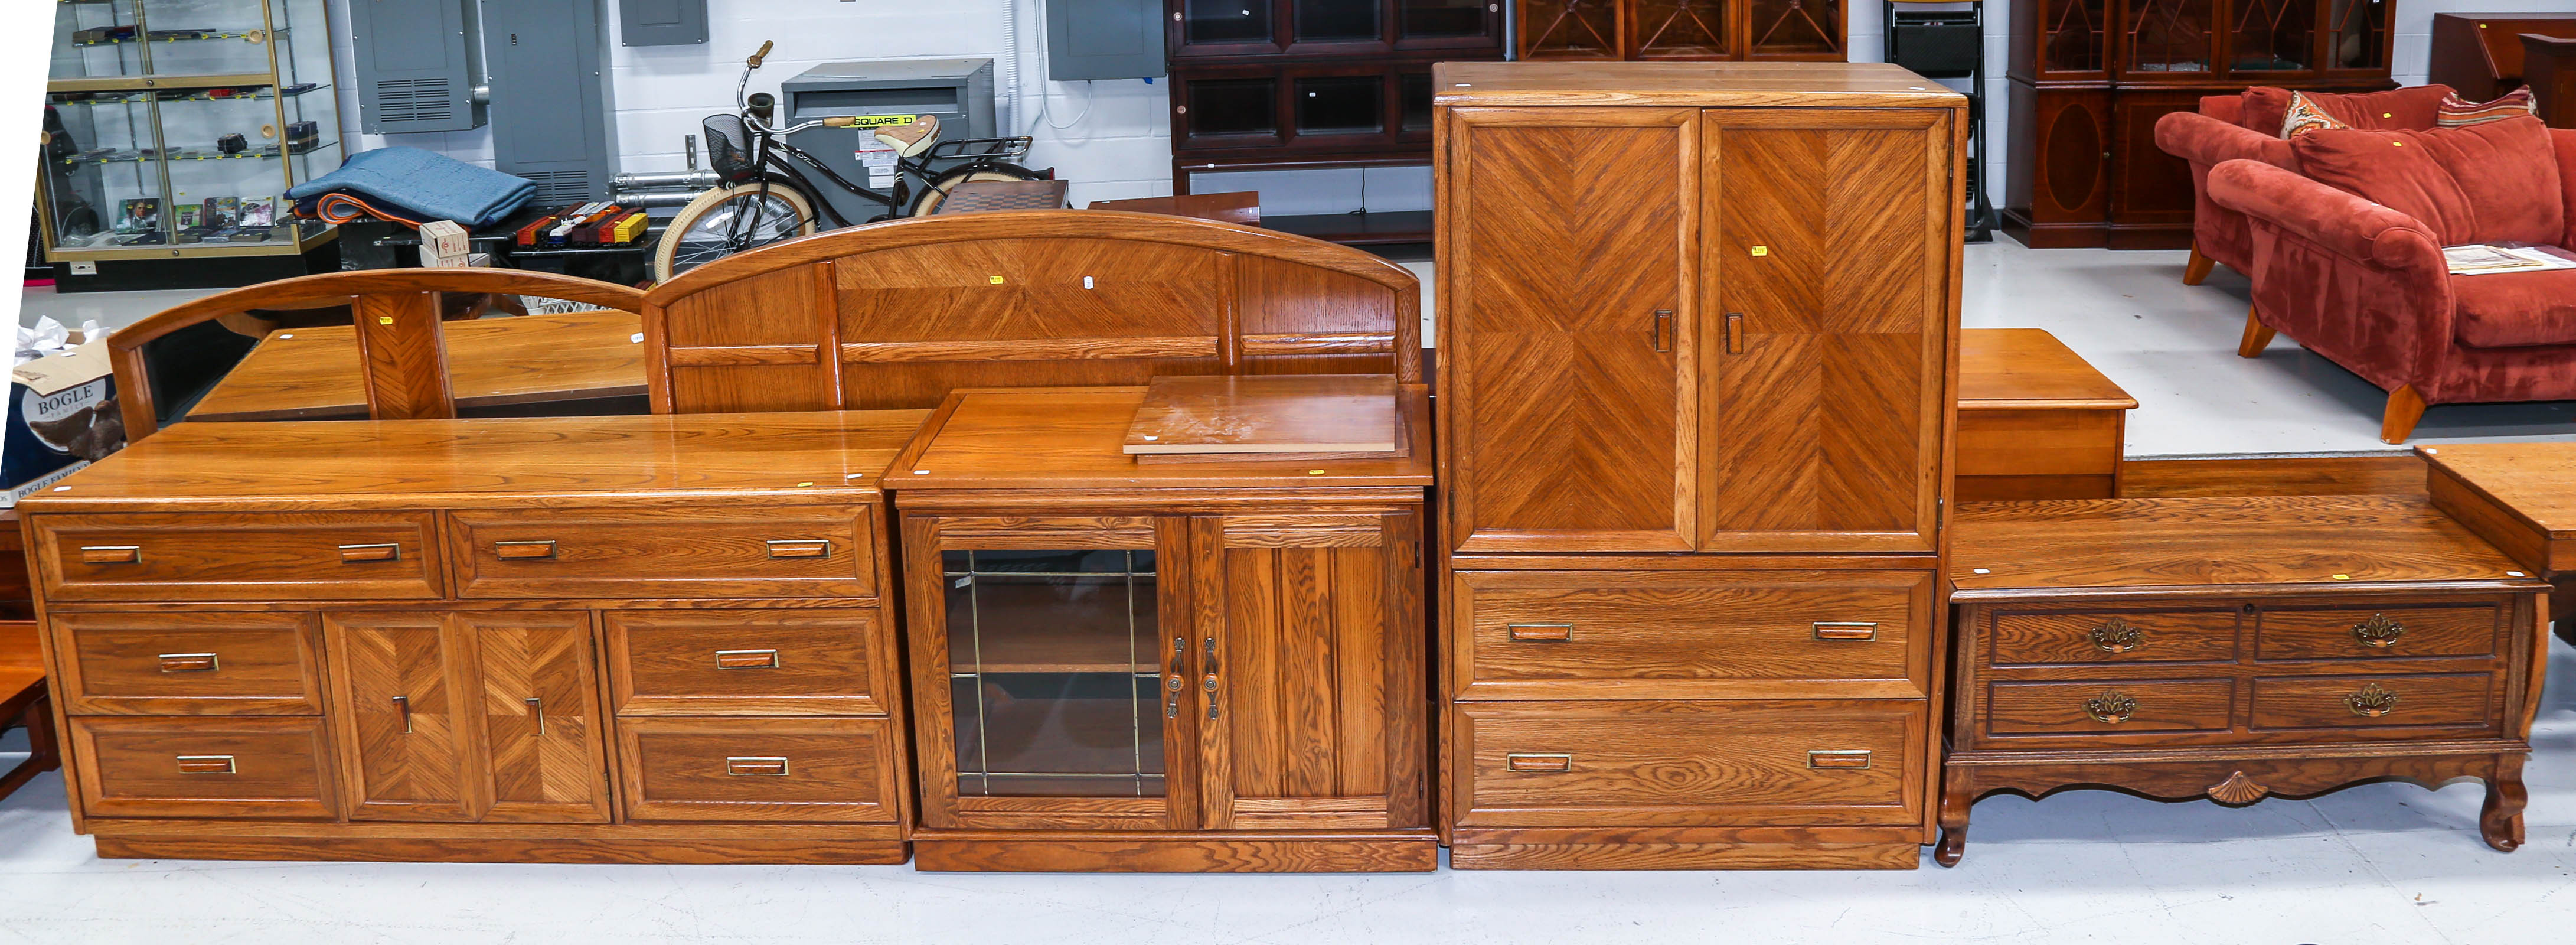 SIX PIECES OF ASSORTED FURNITURE 2e92d4